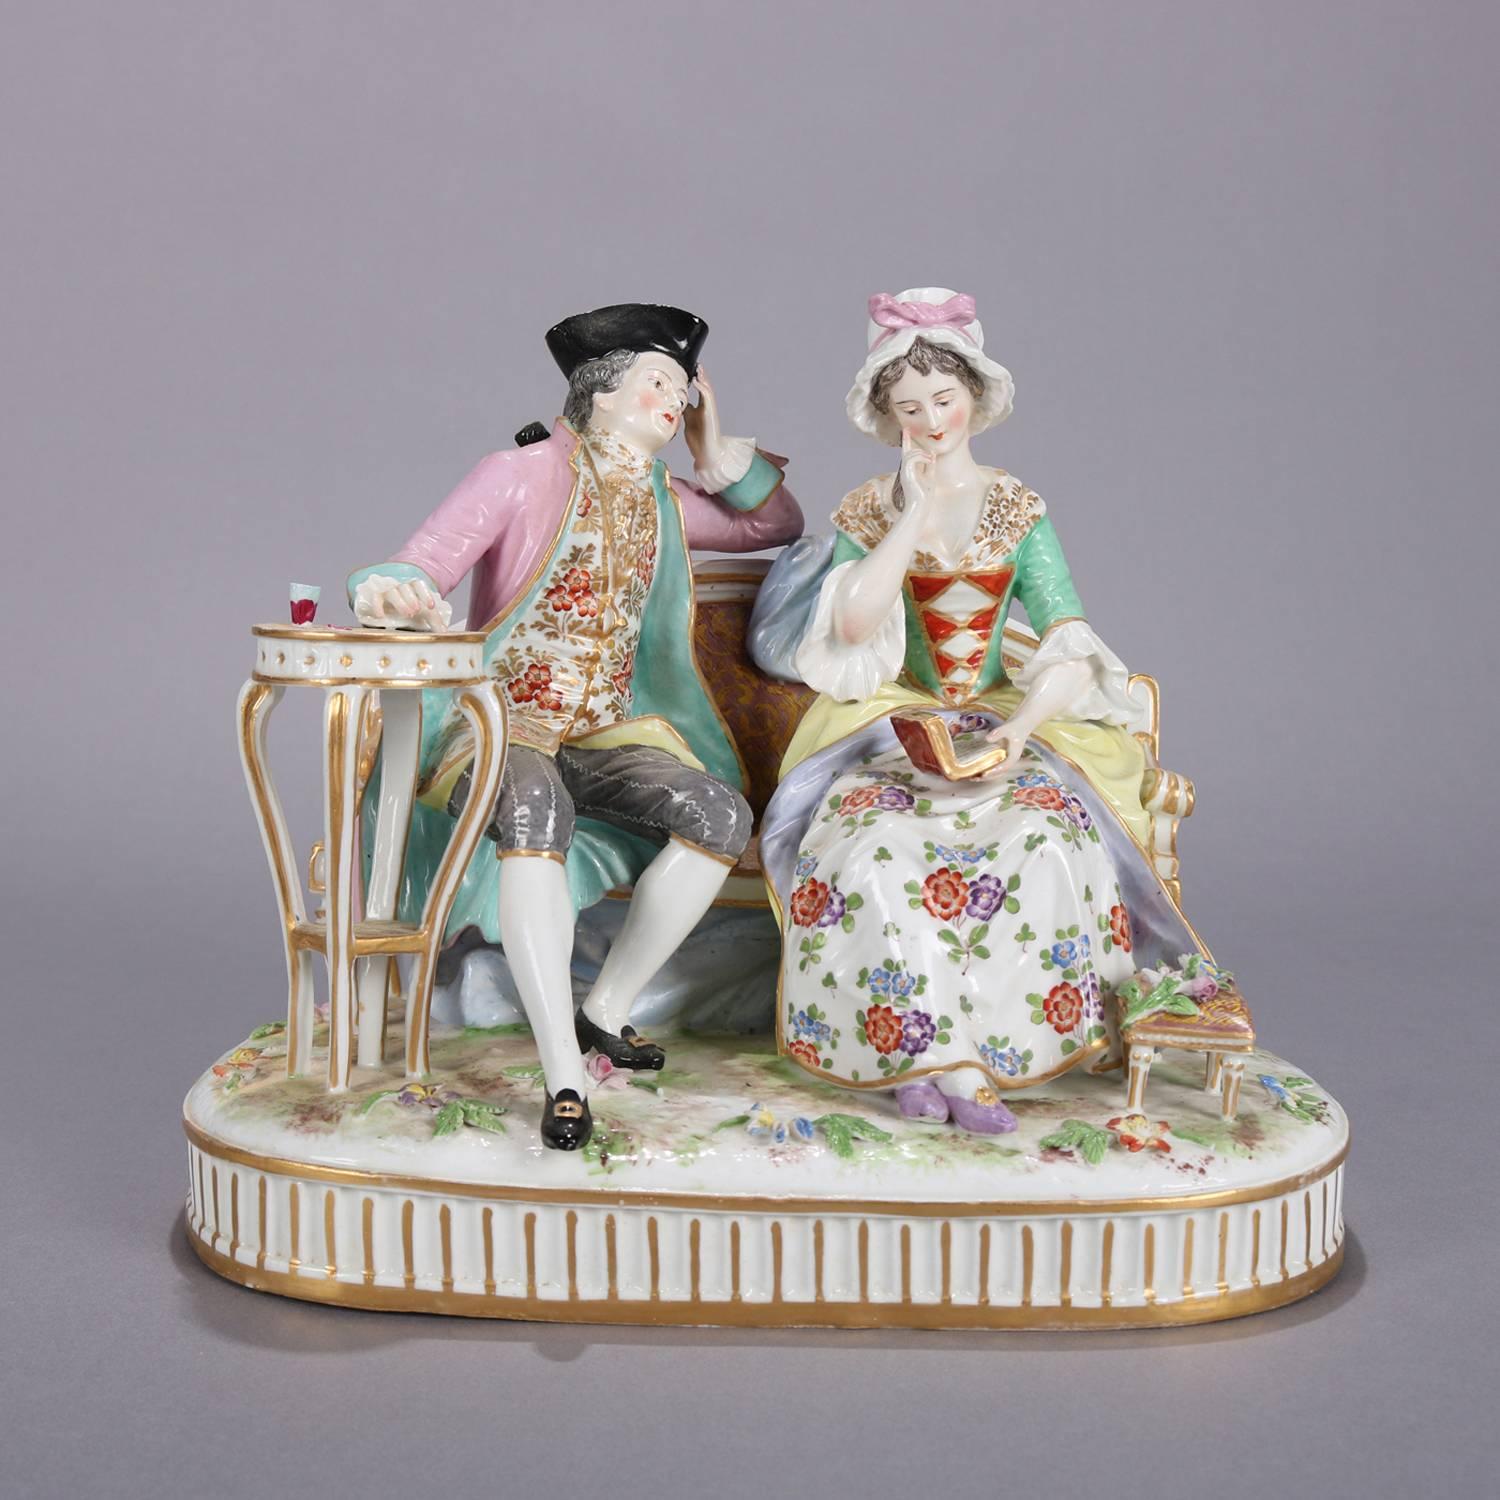 Antique German Meissen School hand-painted porcelain figural group depicts parlour scene with courting couple, gilt highlights throughout, circa 1880.

Measures: 8